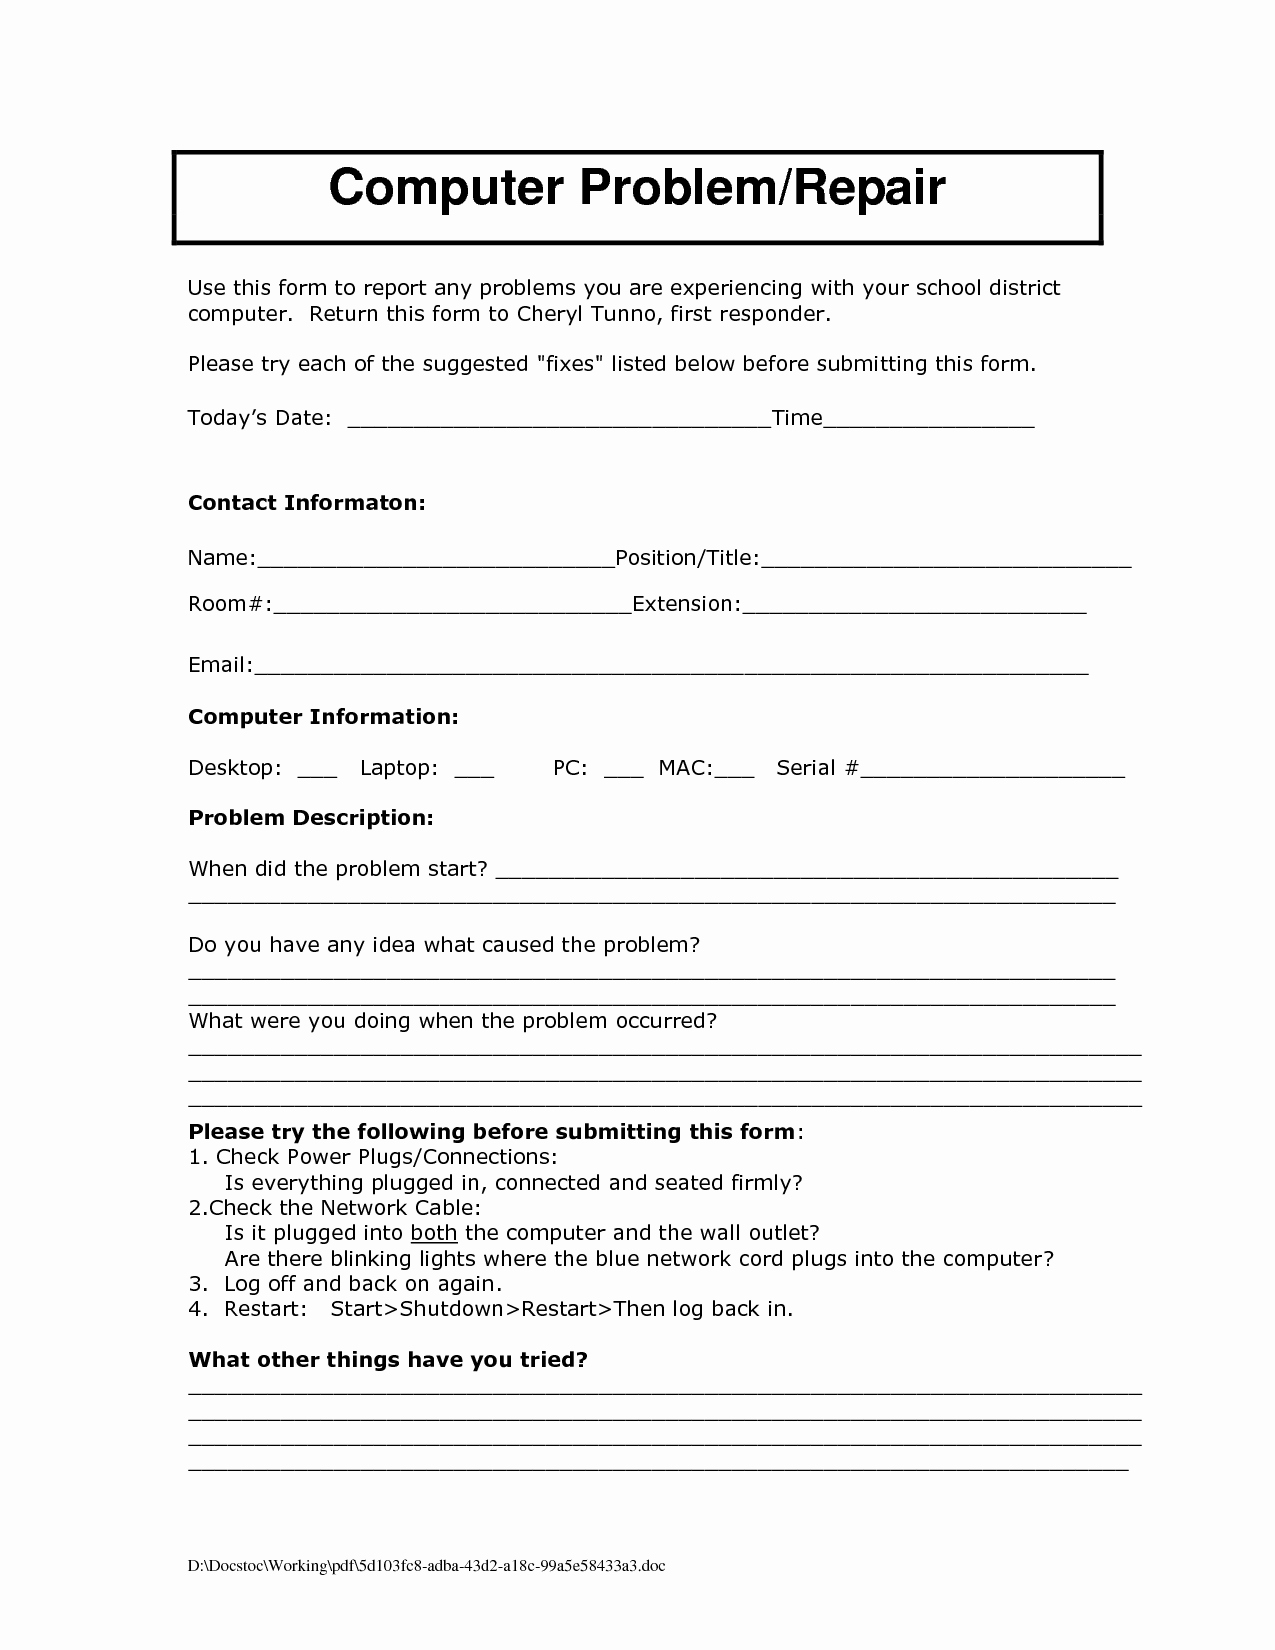 Computer Repair form Template Lovely Laptop Repair Laptop Repair Service Agreement Puter